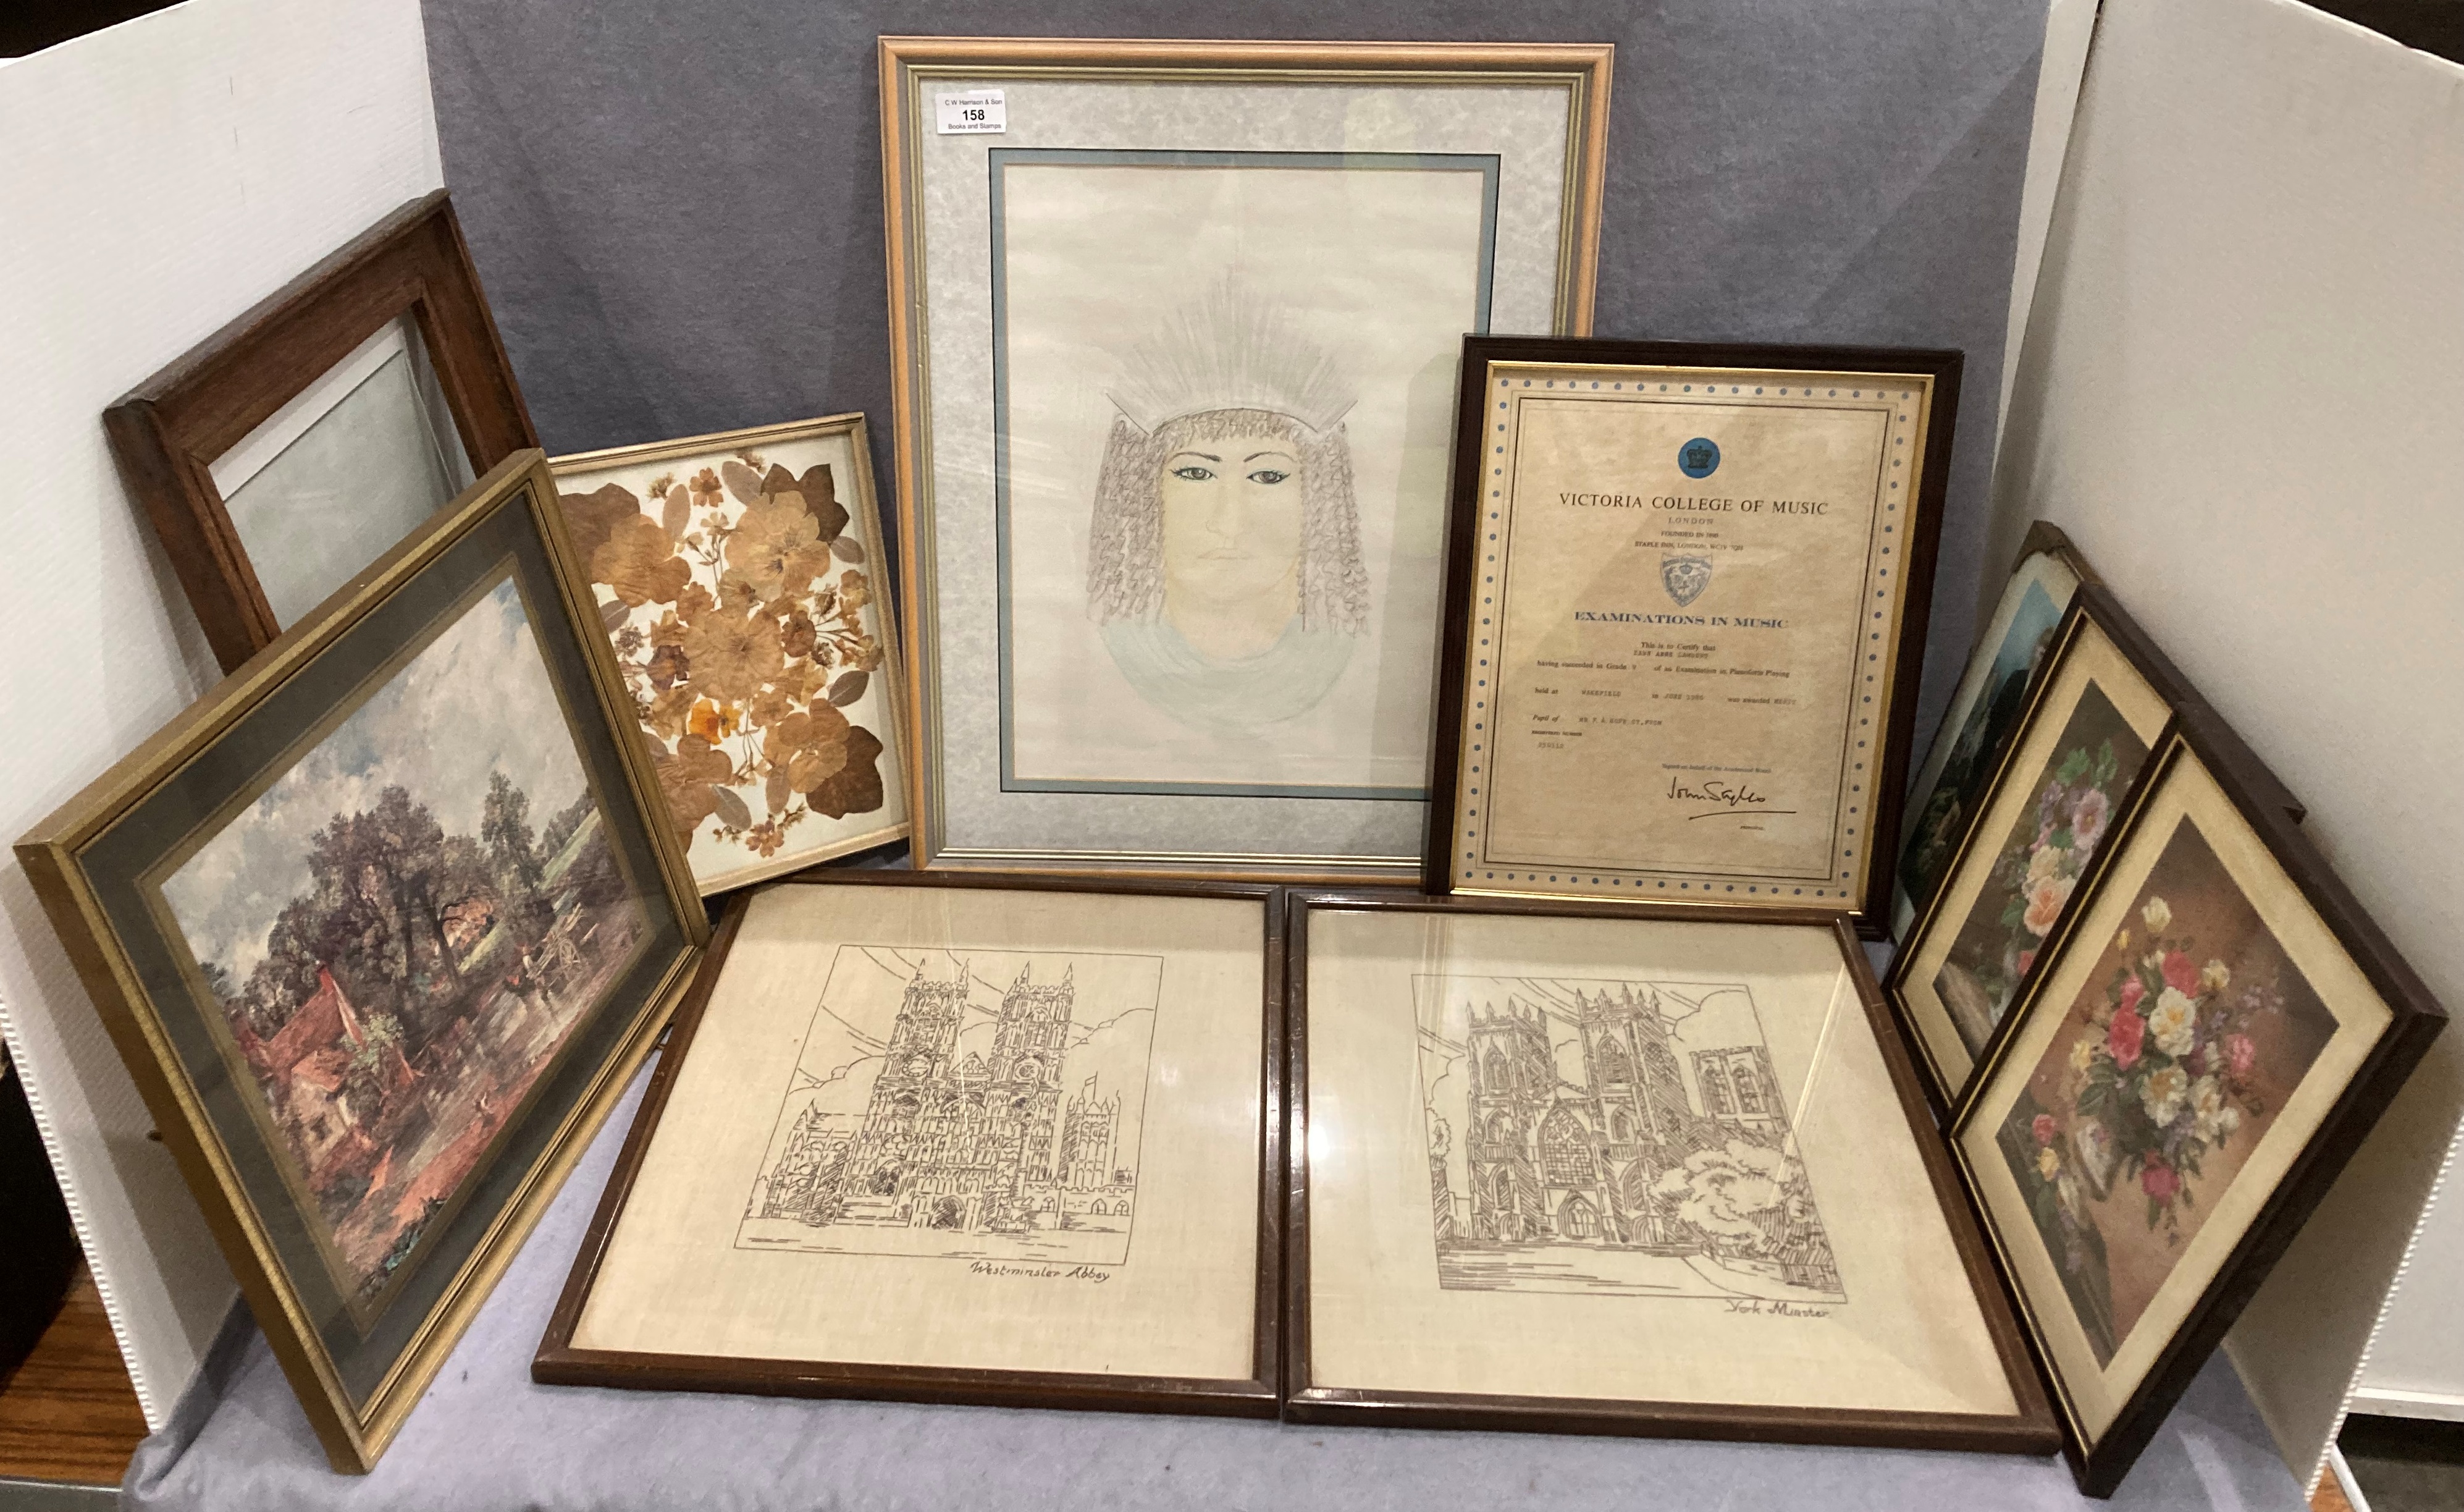 Contents to box - various framed pictures and prints